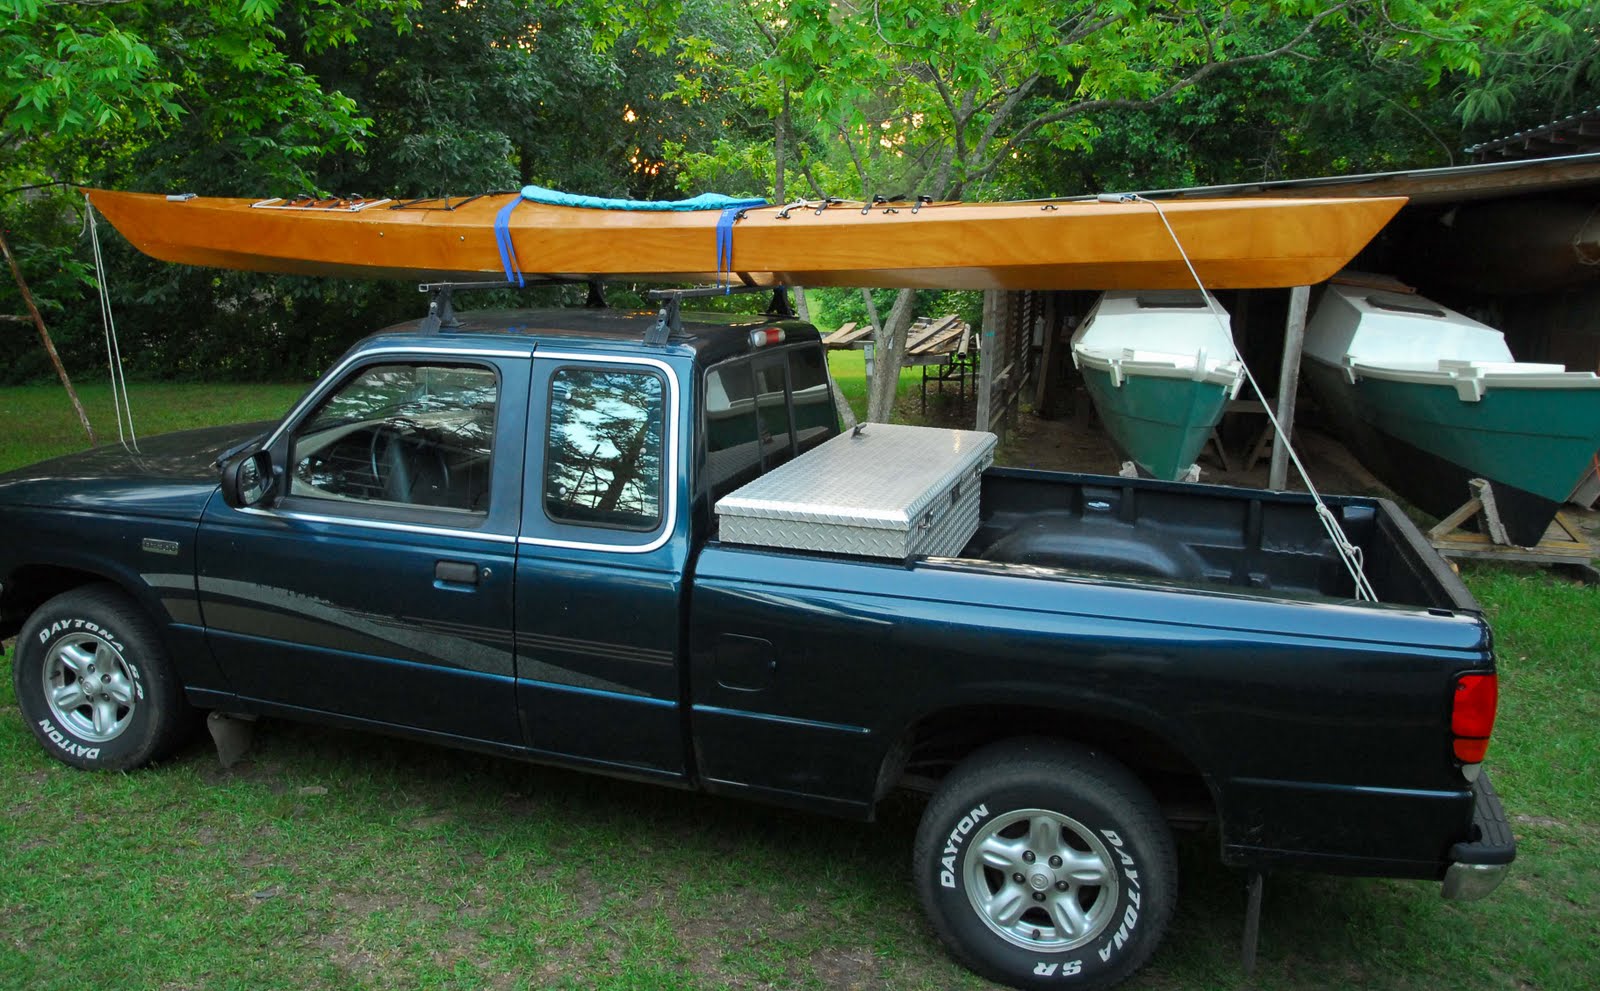 Bug-Out Survival: Roof Racks for Your Bug Out Vehicle